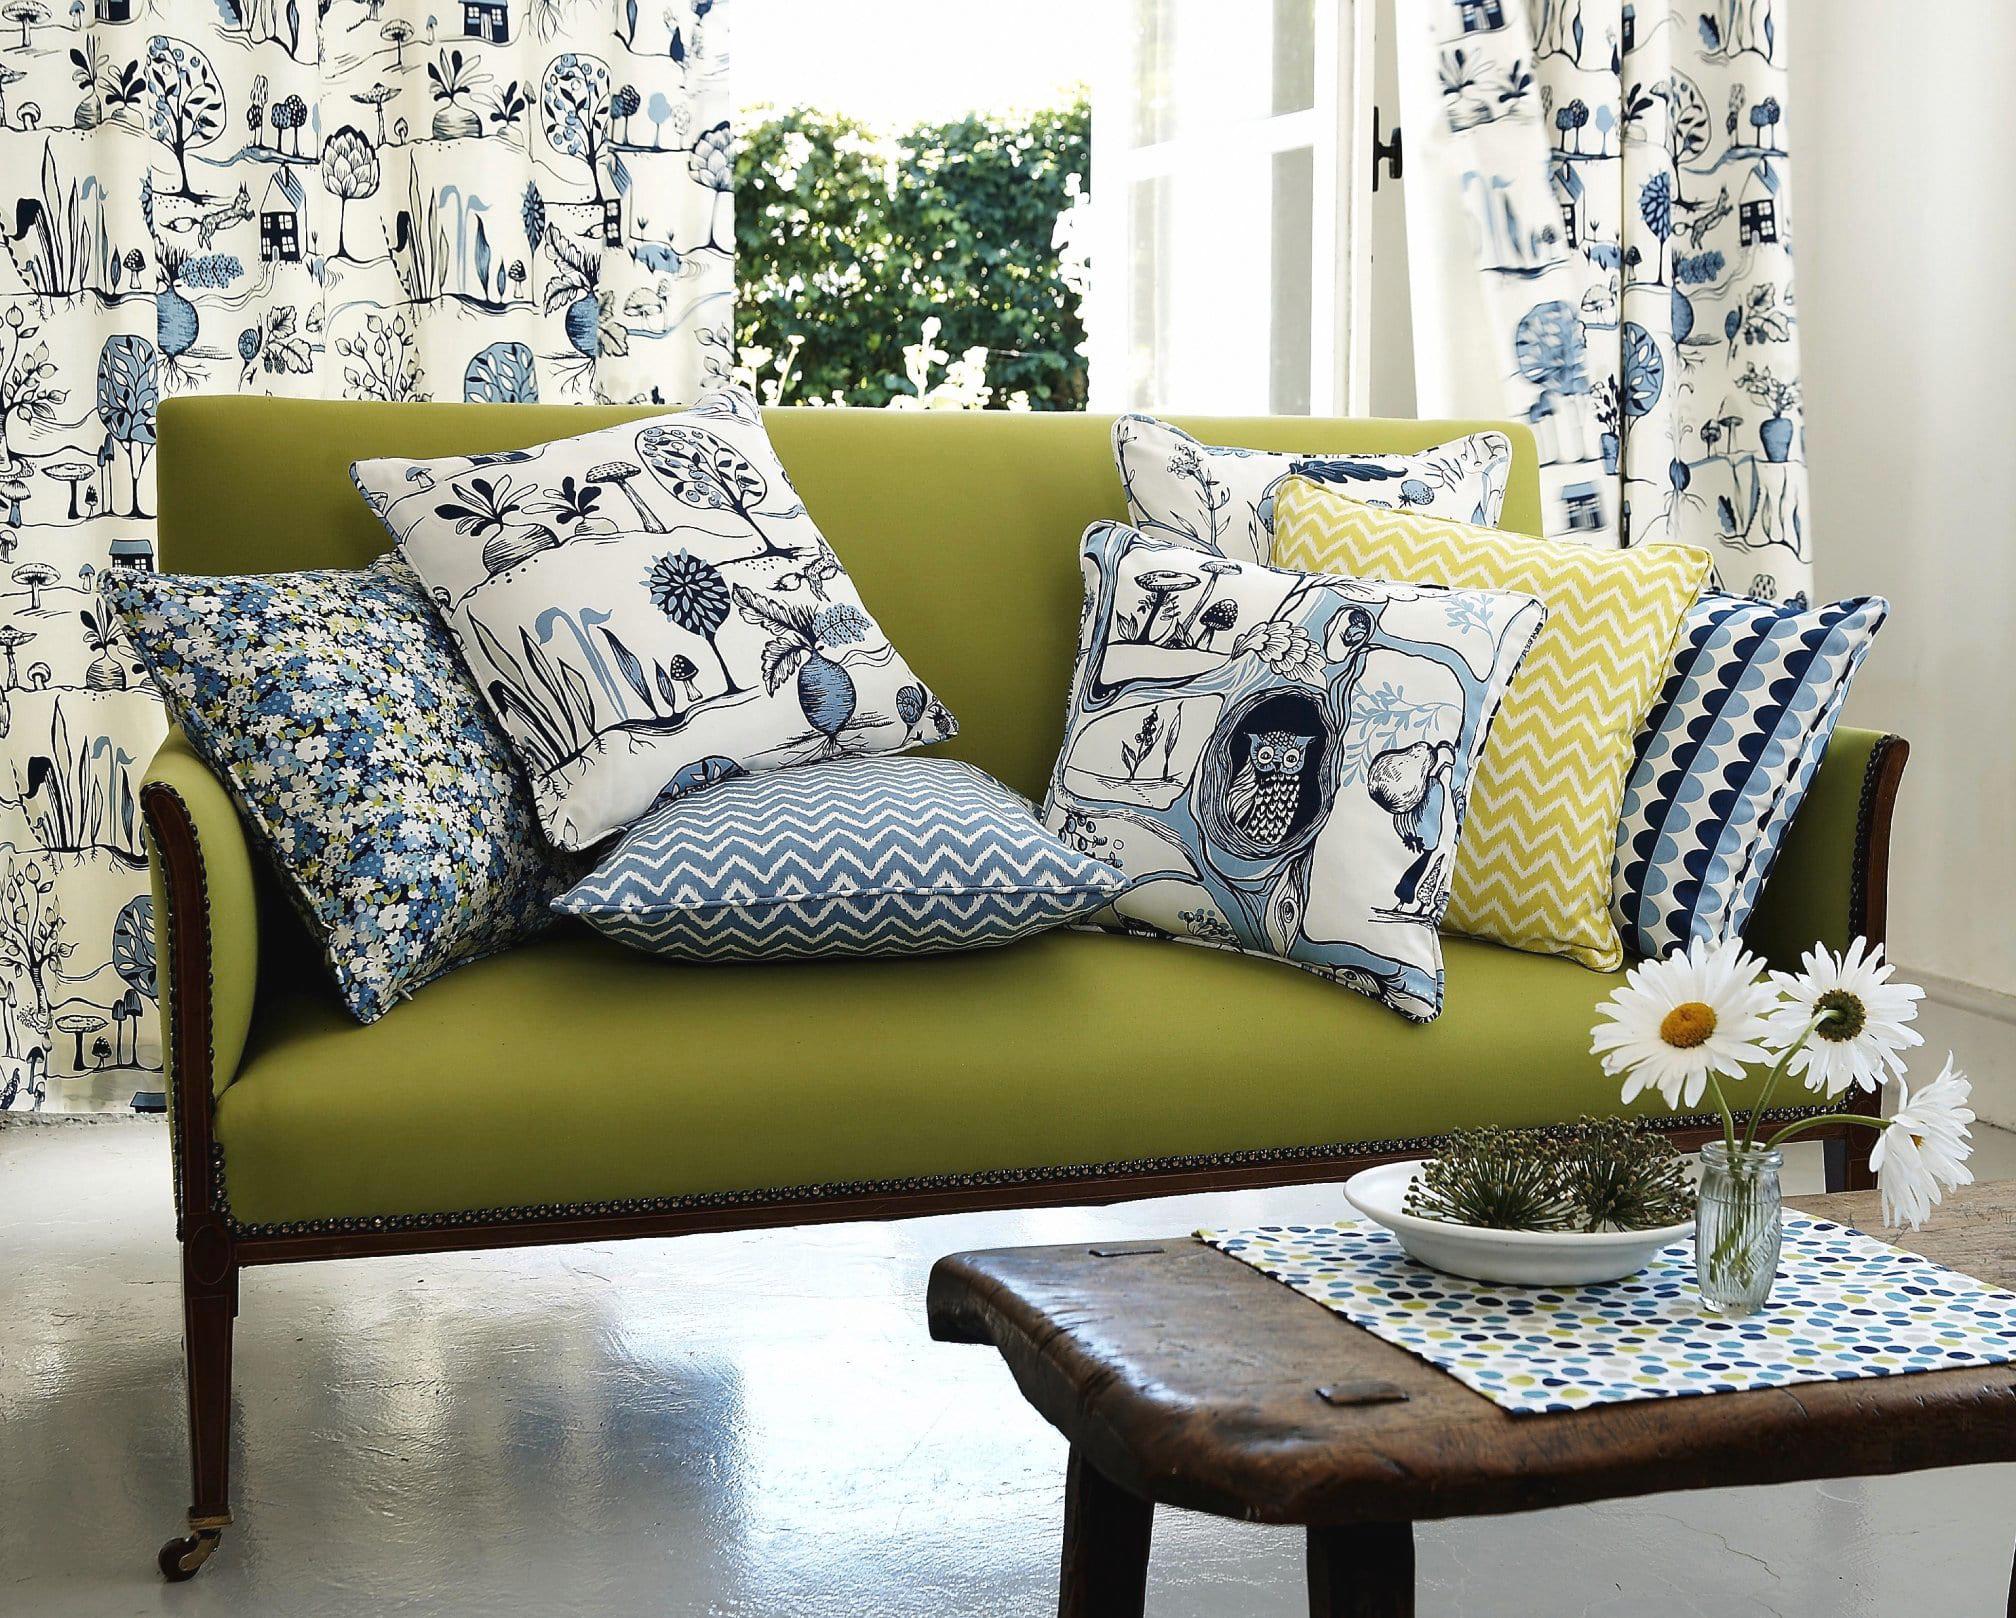 Images Anne Ginger Soft Furnishings